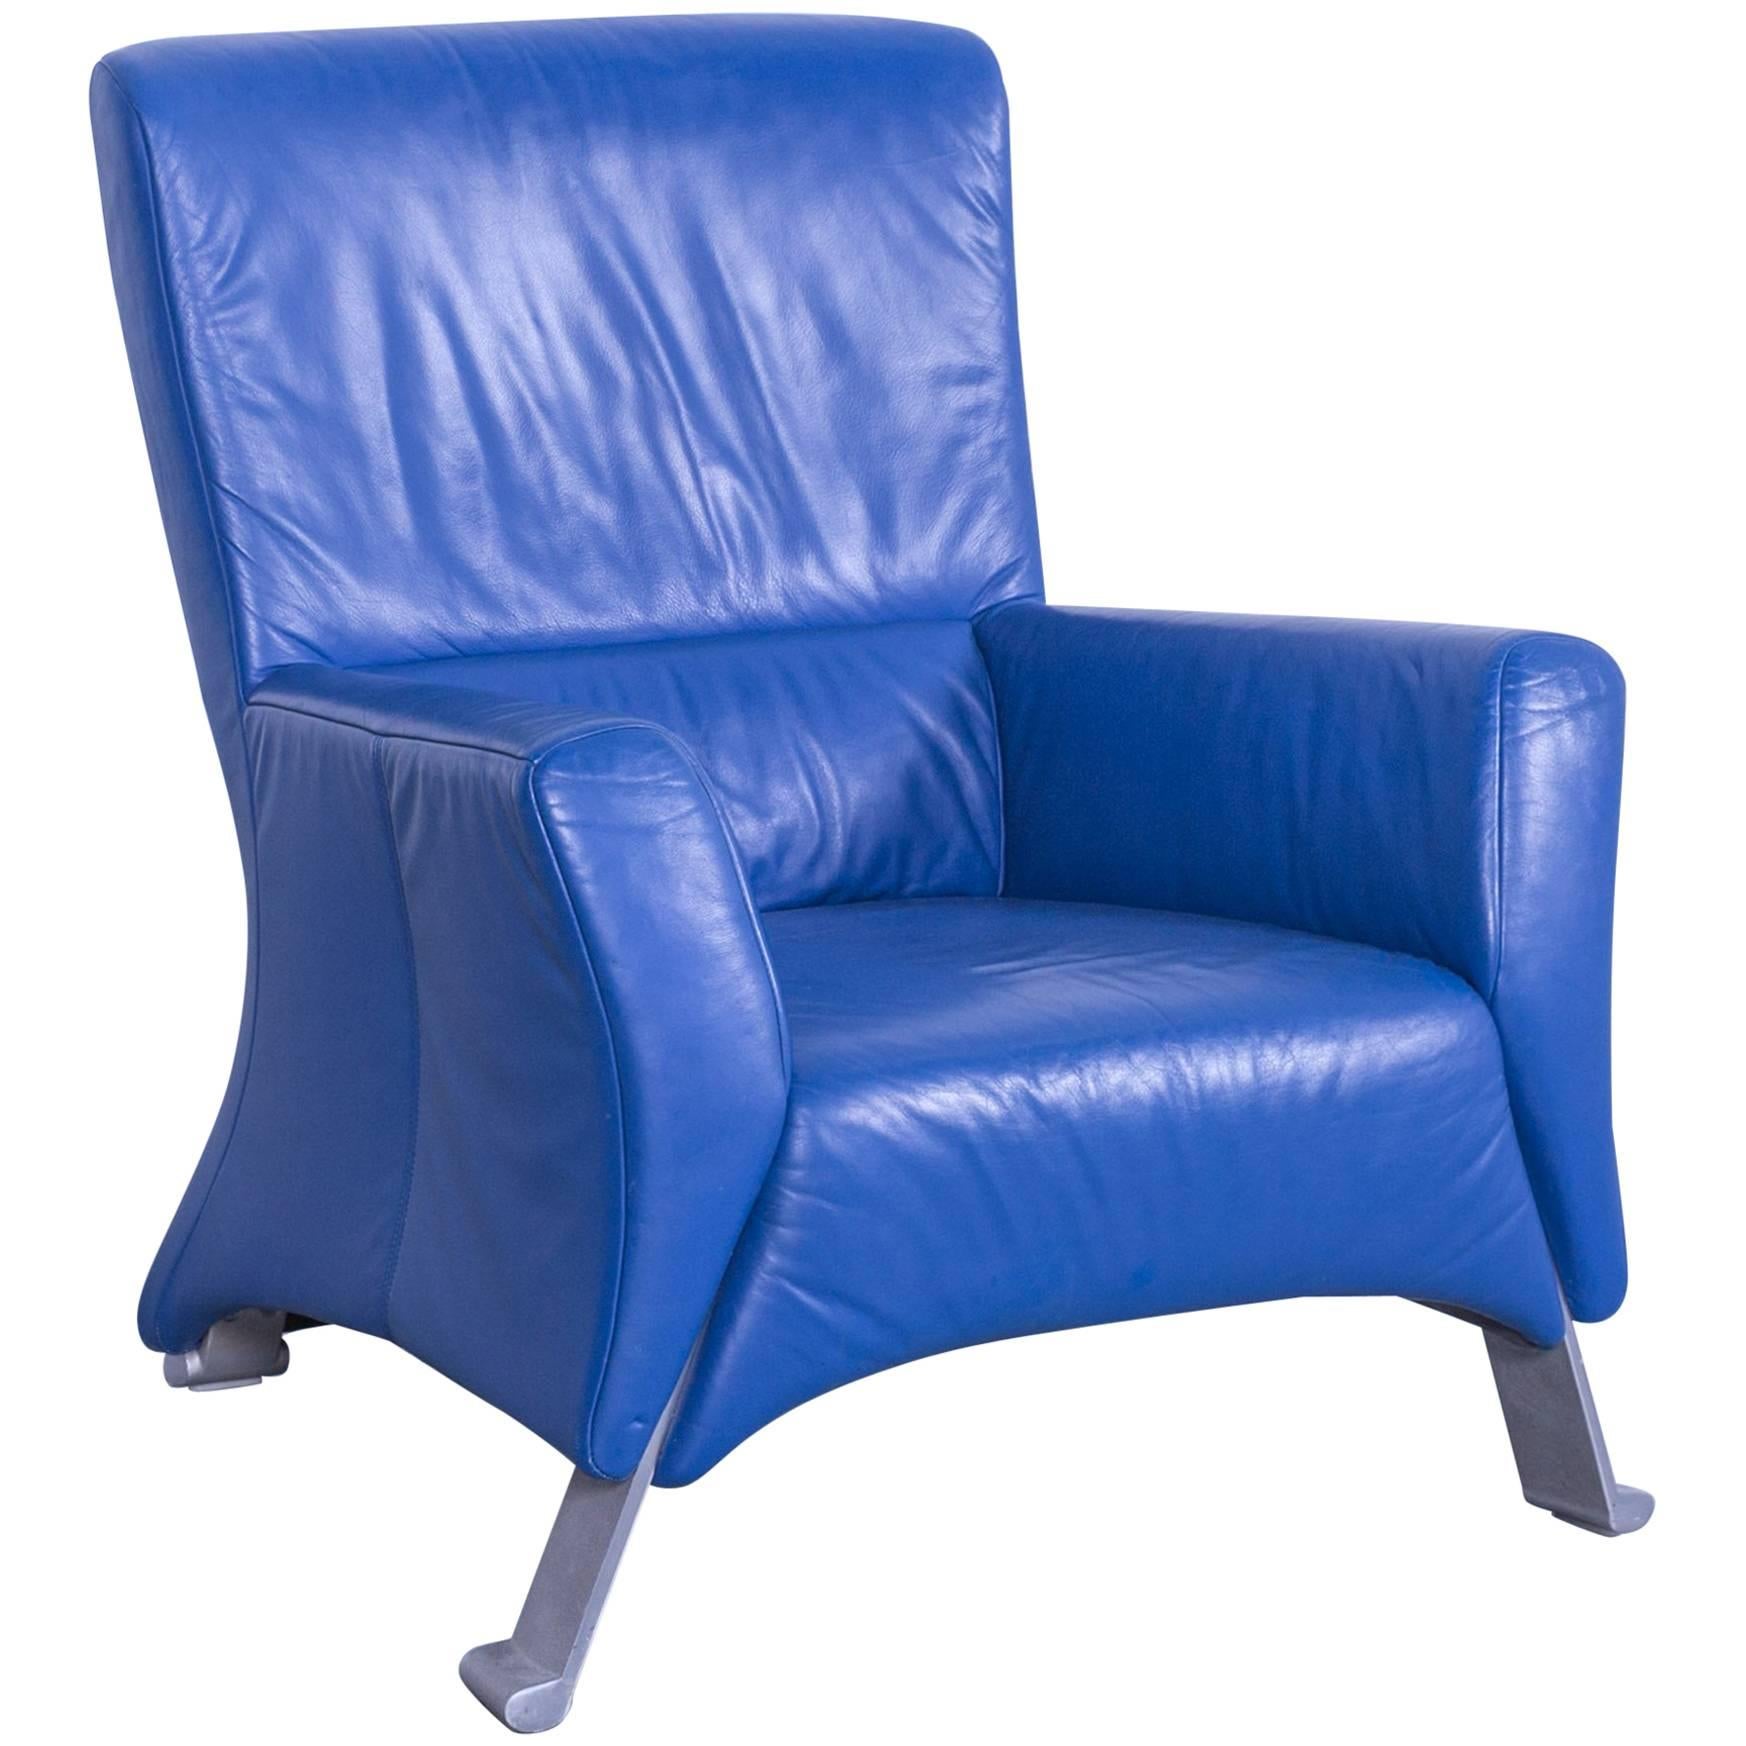 Rolf Benz HSE 322 Designer Armchair Leather Blue One Seat Couch